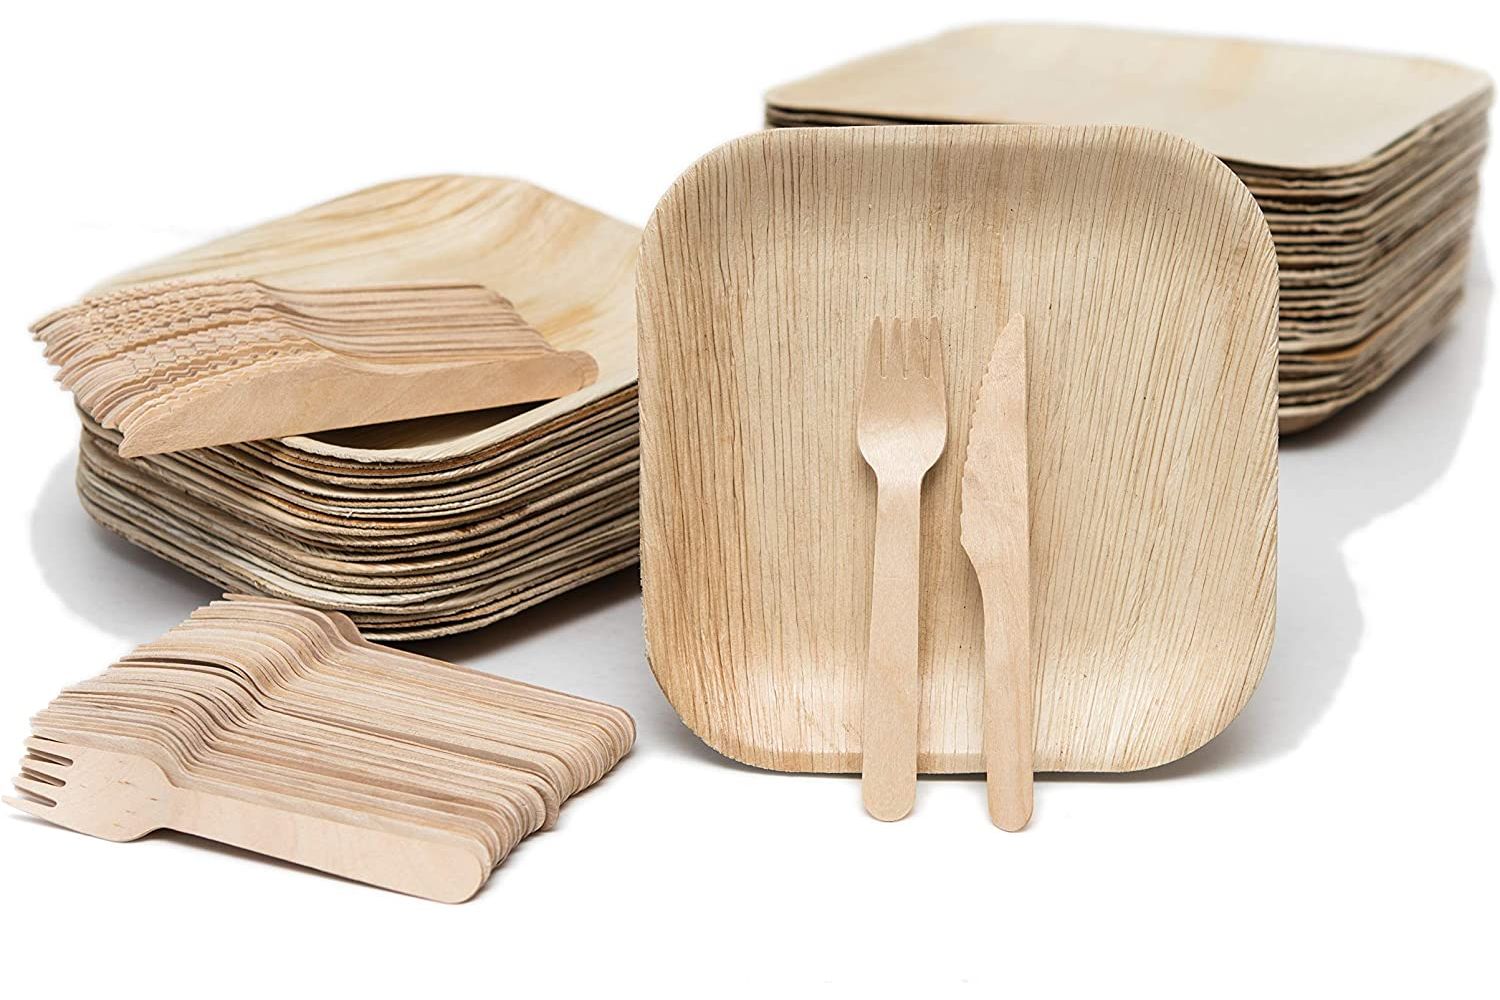 Everything You Need for a Backyard Cookout Options: EvermadeGREEN Plate Set